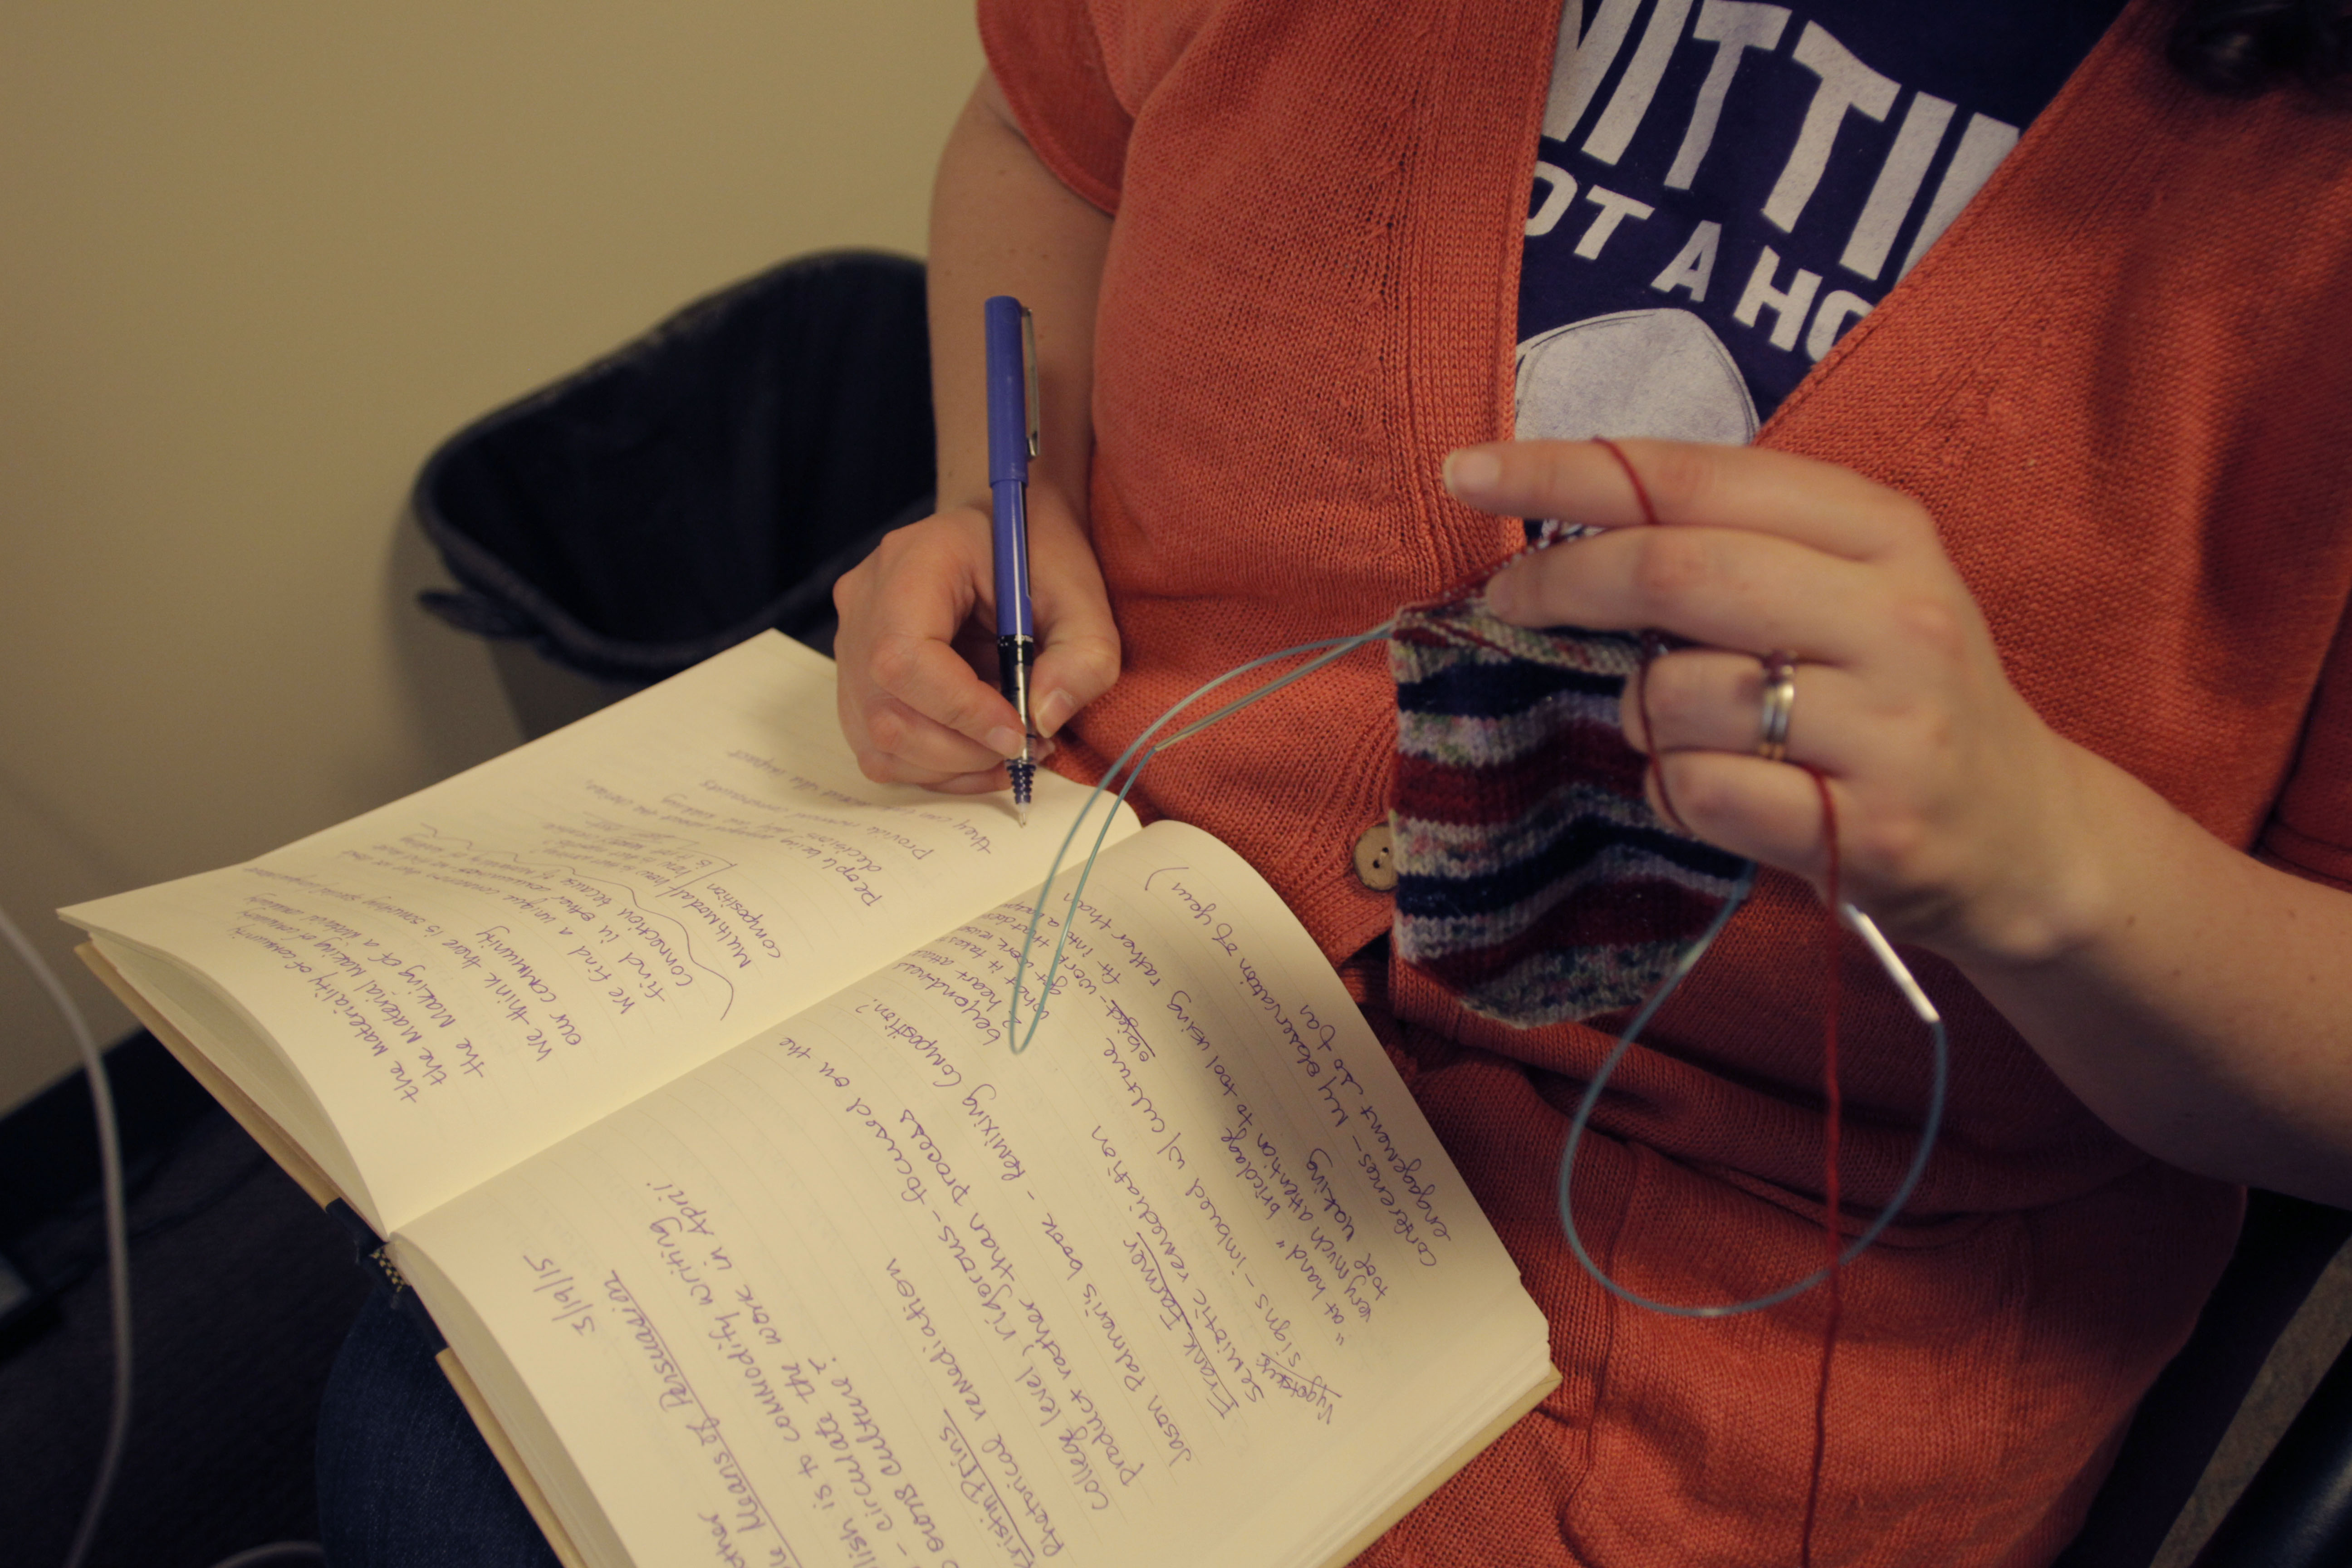 Hannah writing in her notebook and knitting